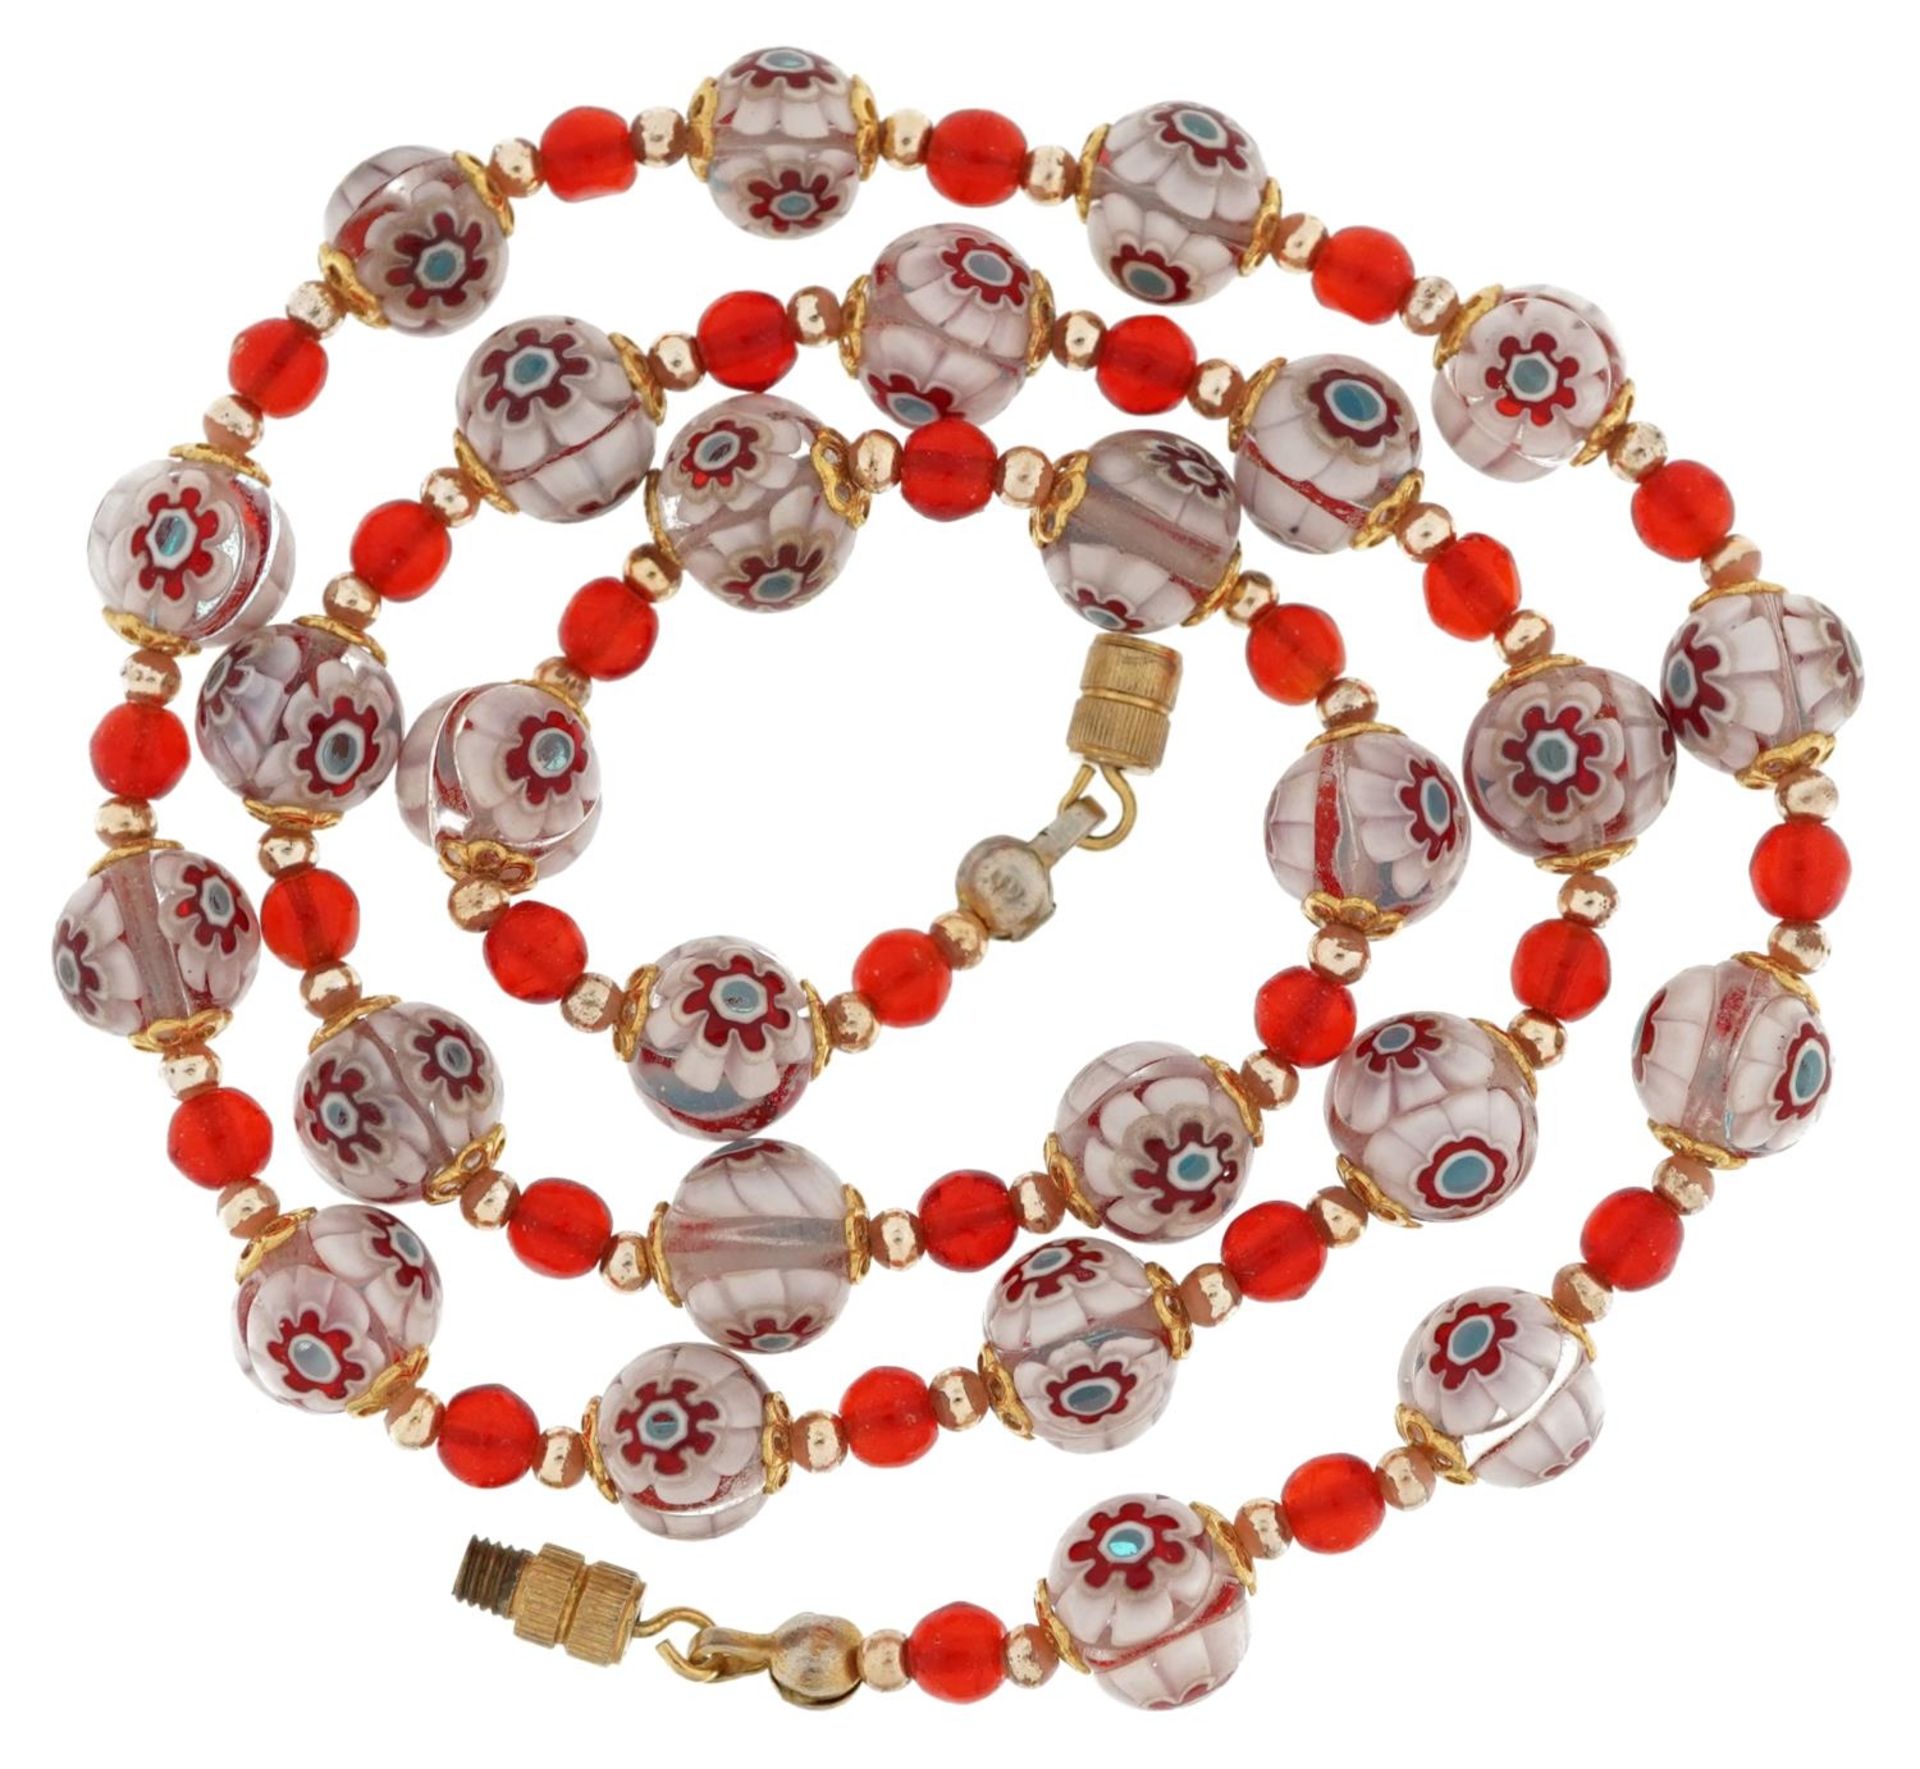 Italian millefiori glass bead necklace with barrel clasp, 48cm in length, 24.5g